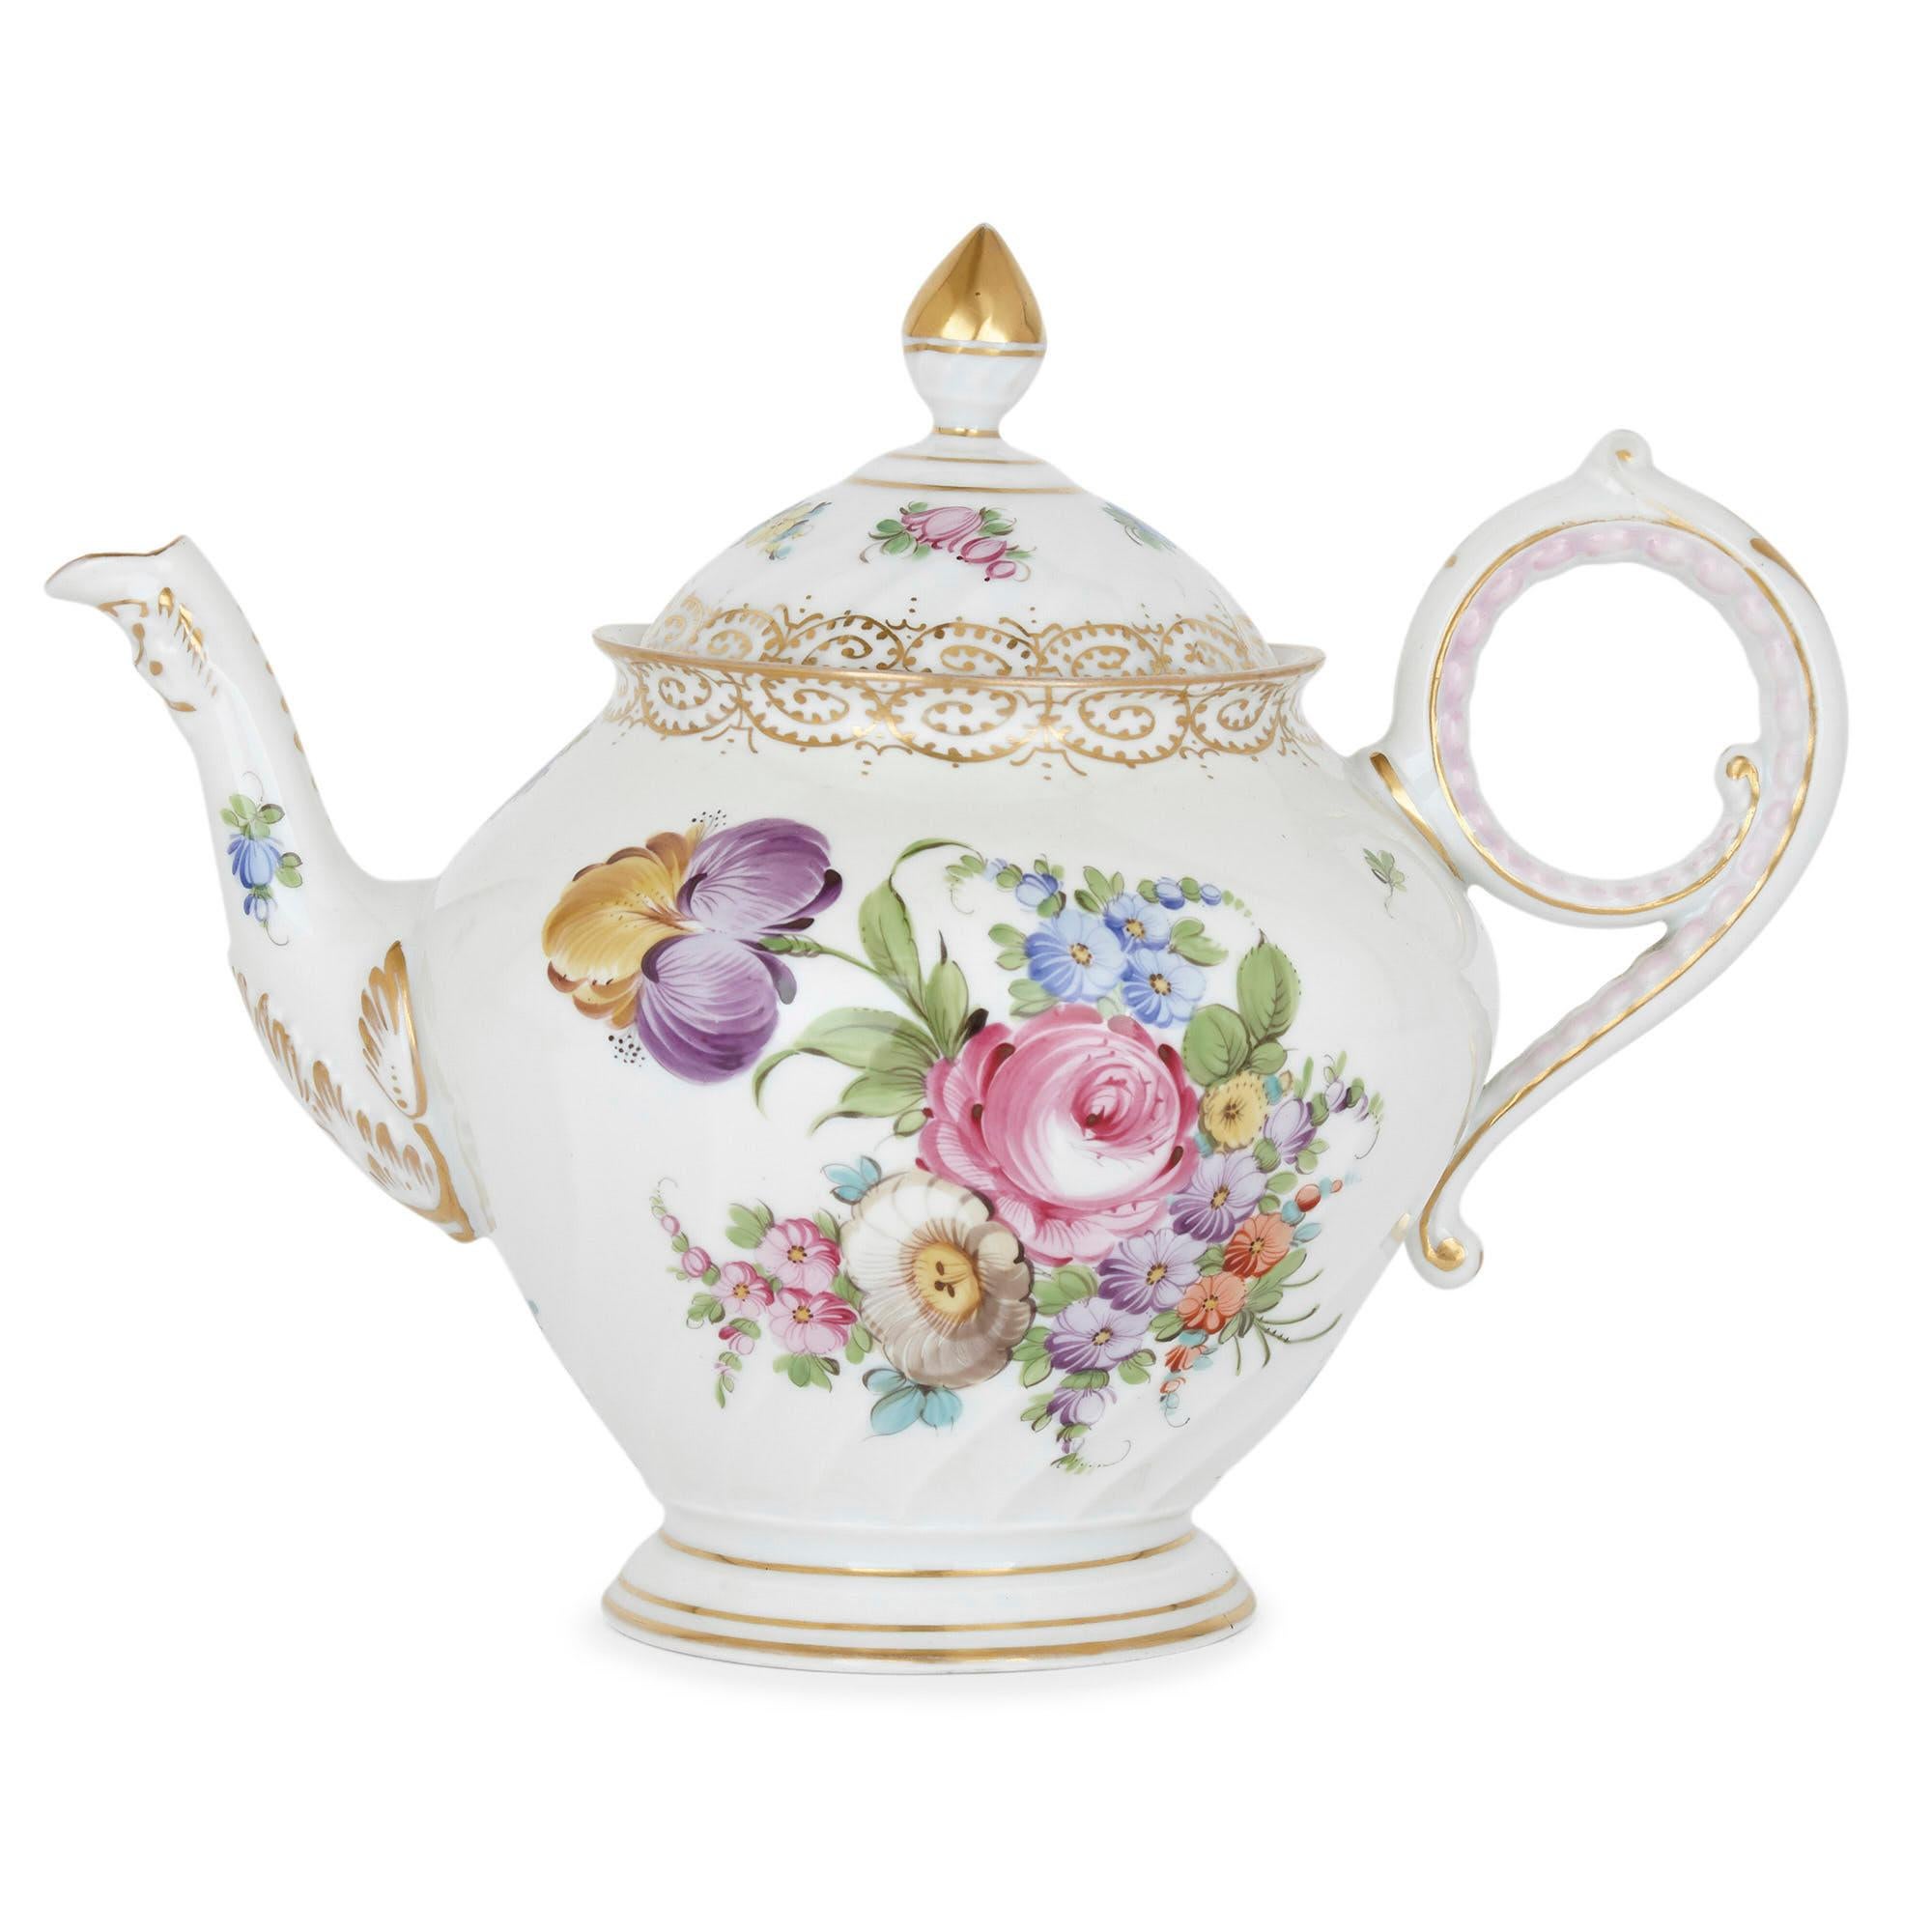 Large floral porcelain dessert service by Dresden
German, early 20th century
Measures: Teapot height 21cm, width 26cm, depth 18cm
Smallest cup height 6cm, width 7.5cm, depth 6cm

This fine dessert service is a beautiful example of Dresden